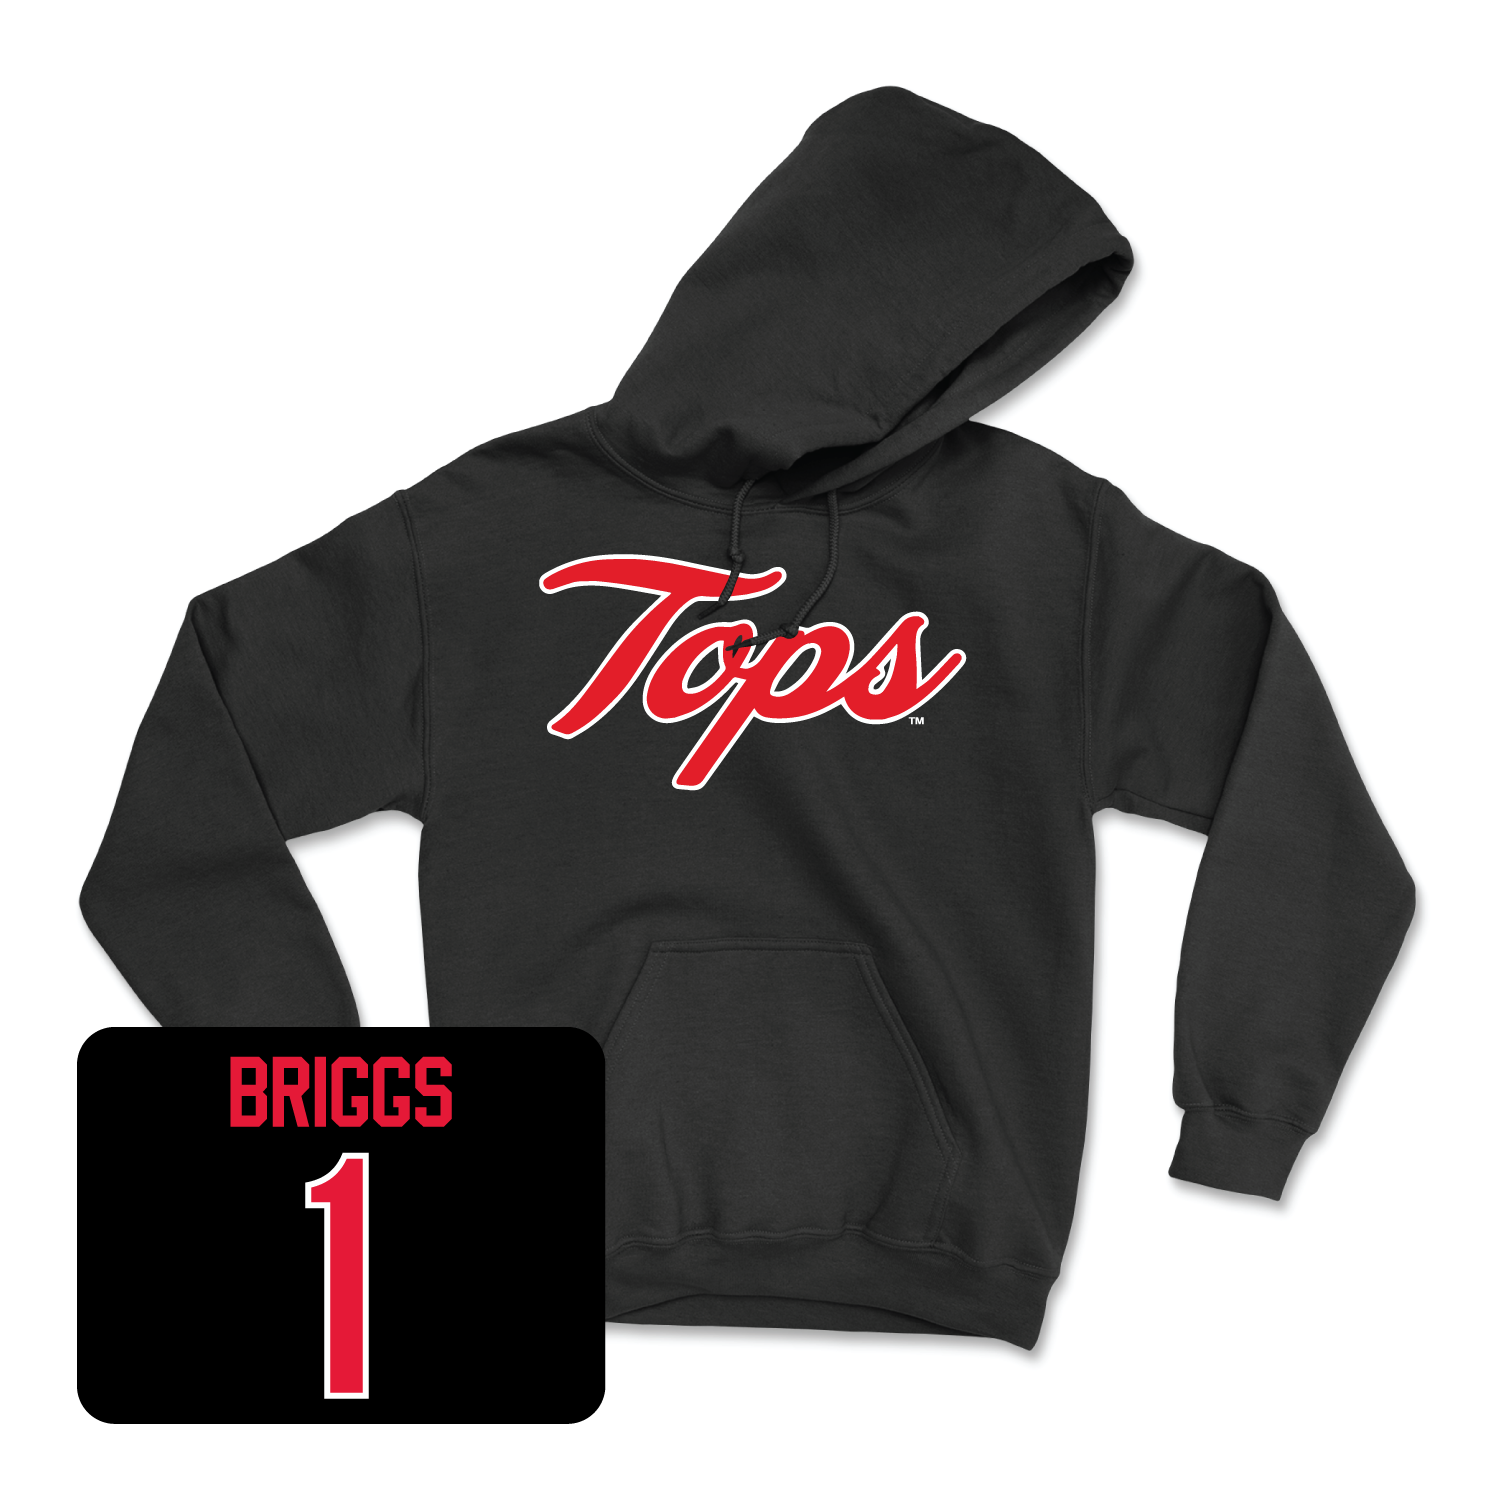 Black Women's Volleyball Tops Hoodie 3X-Large / Paige Briggs | #1